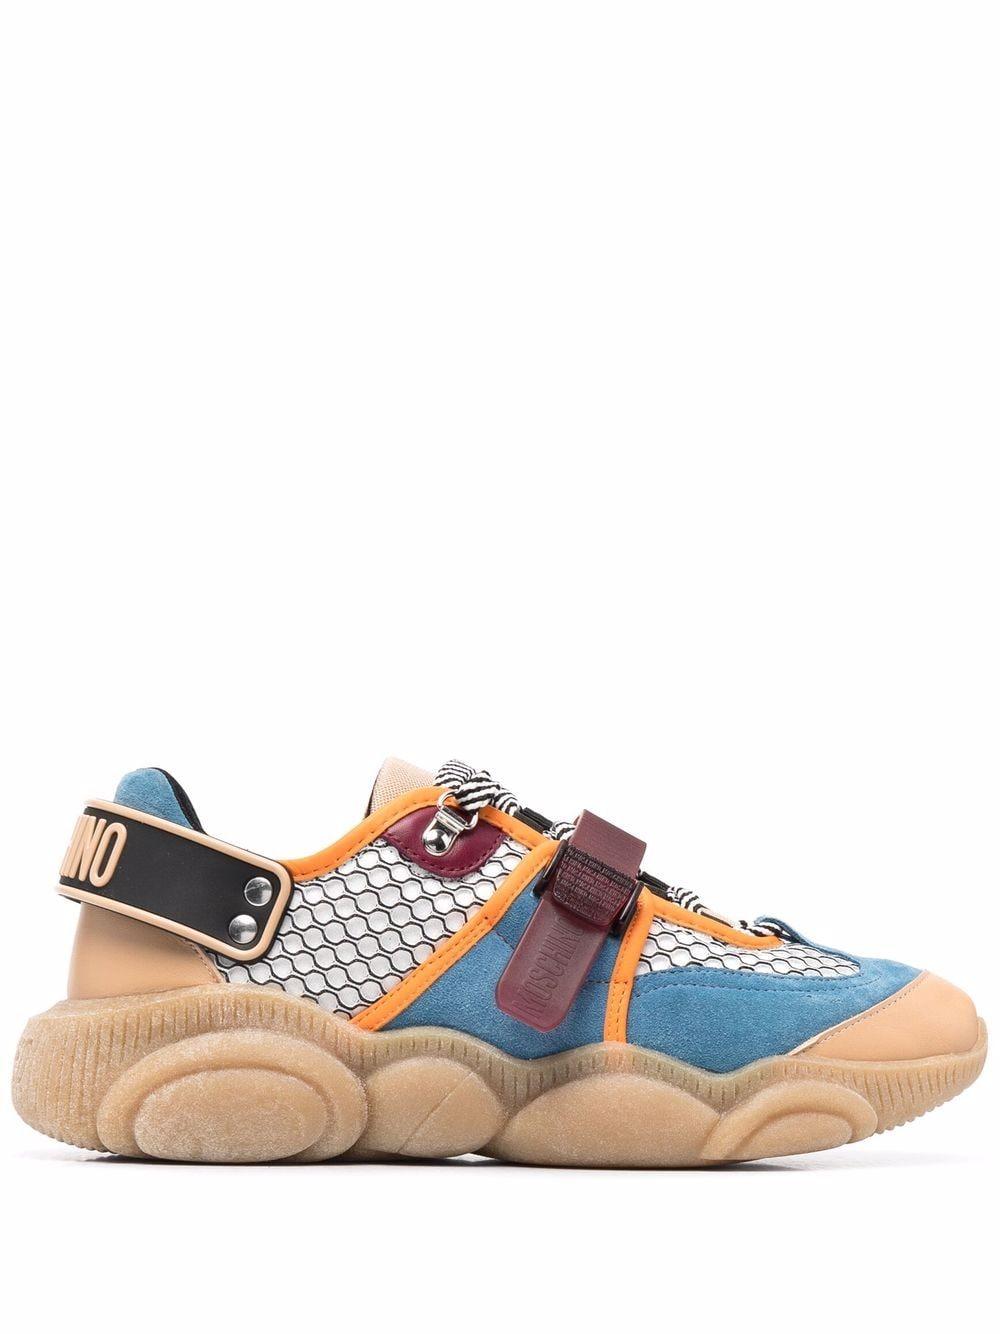 Moschino Roller Skates Teddy Sneakers in Blue for Men | Lyst